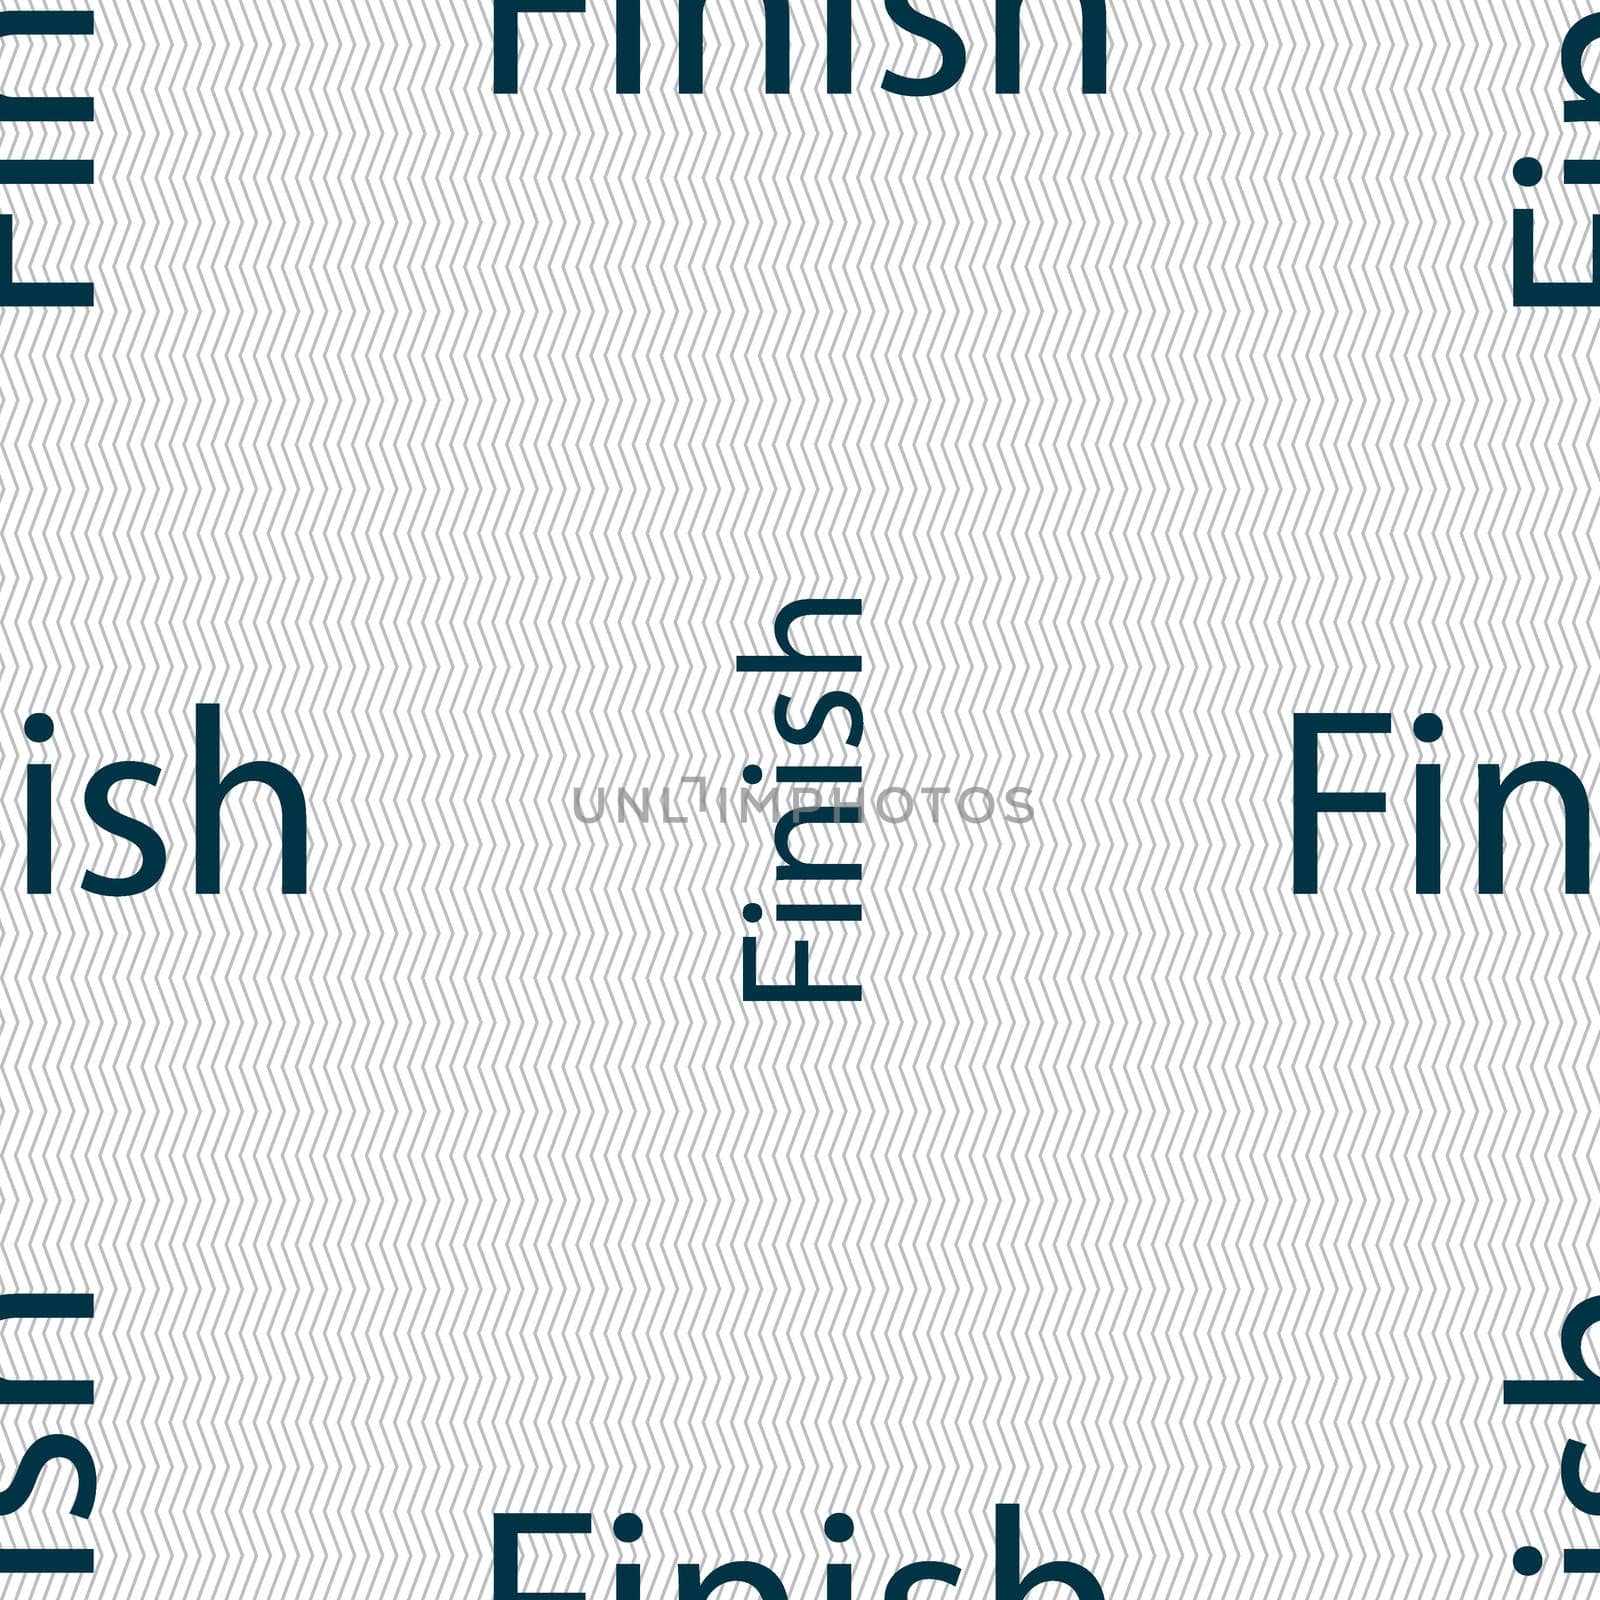 Finish sign icon. Power button. Seamless abstract background with geometric shapes. illustration